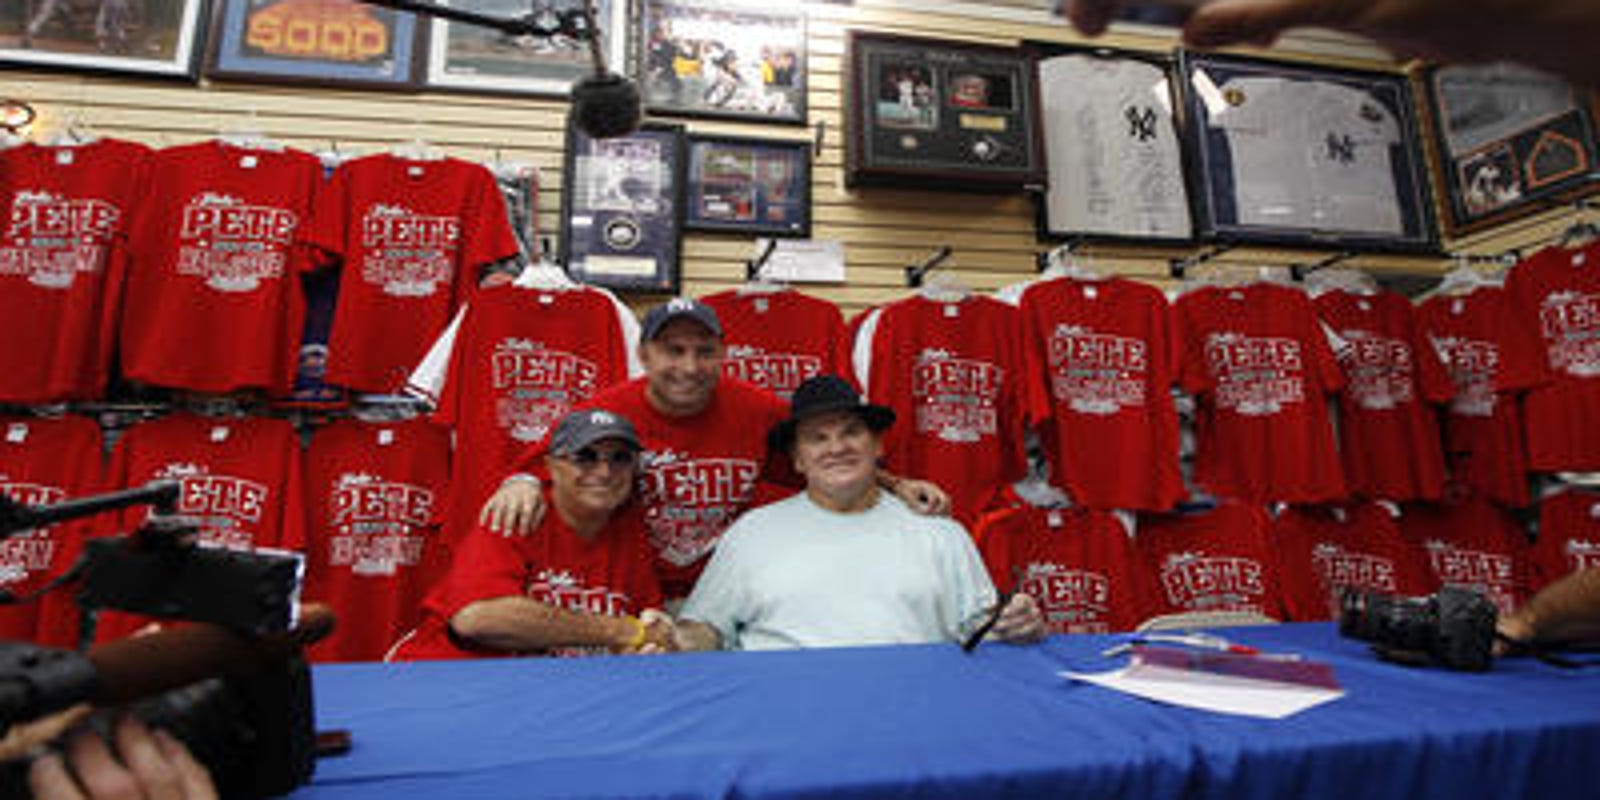 Video Pete Rose at work in Las Vegas signing autographs